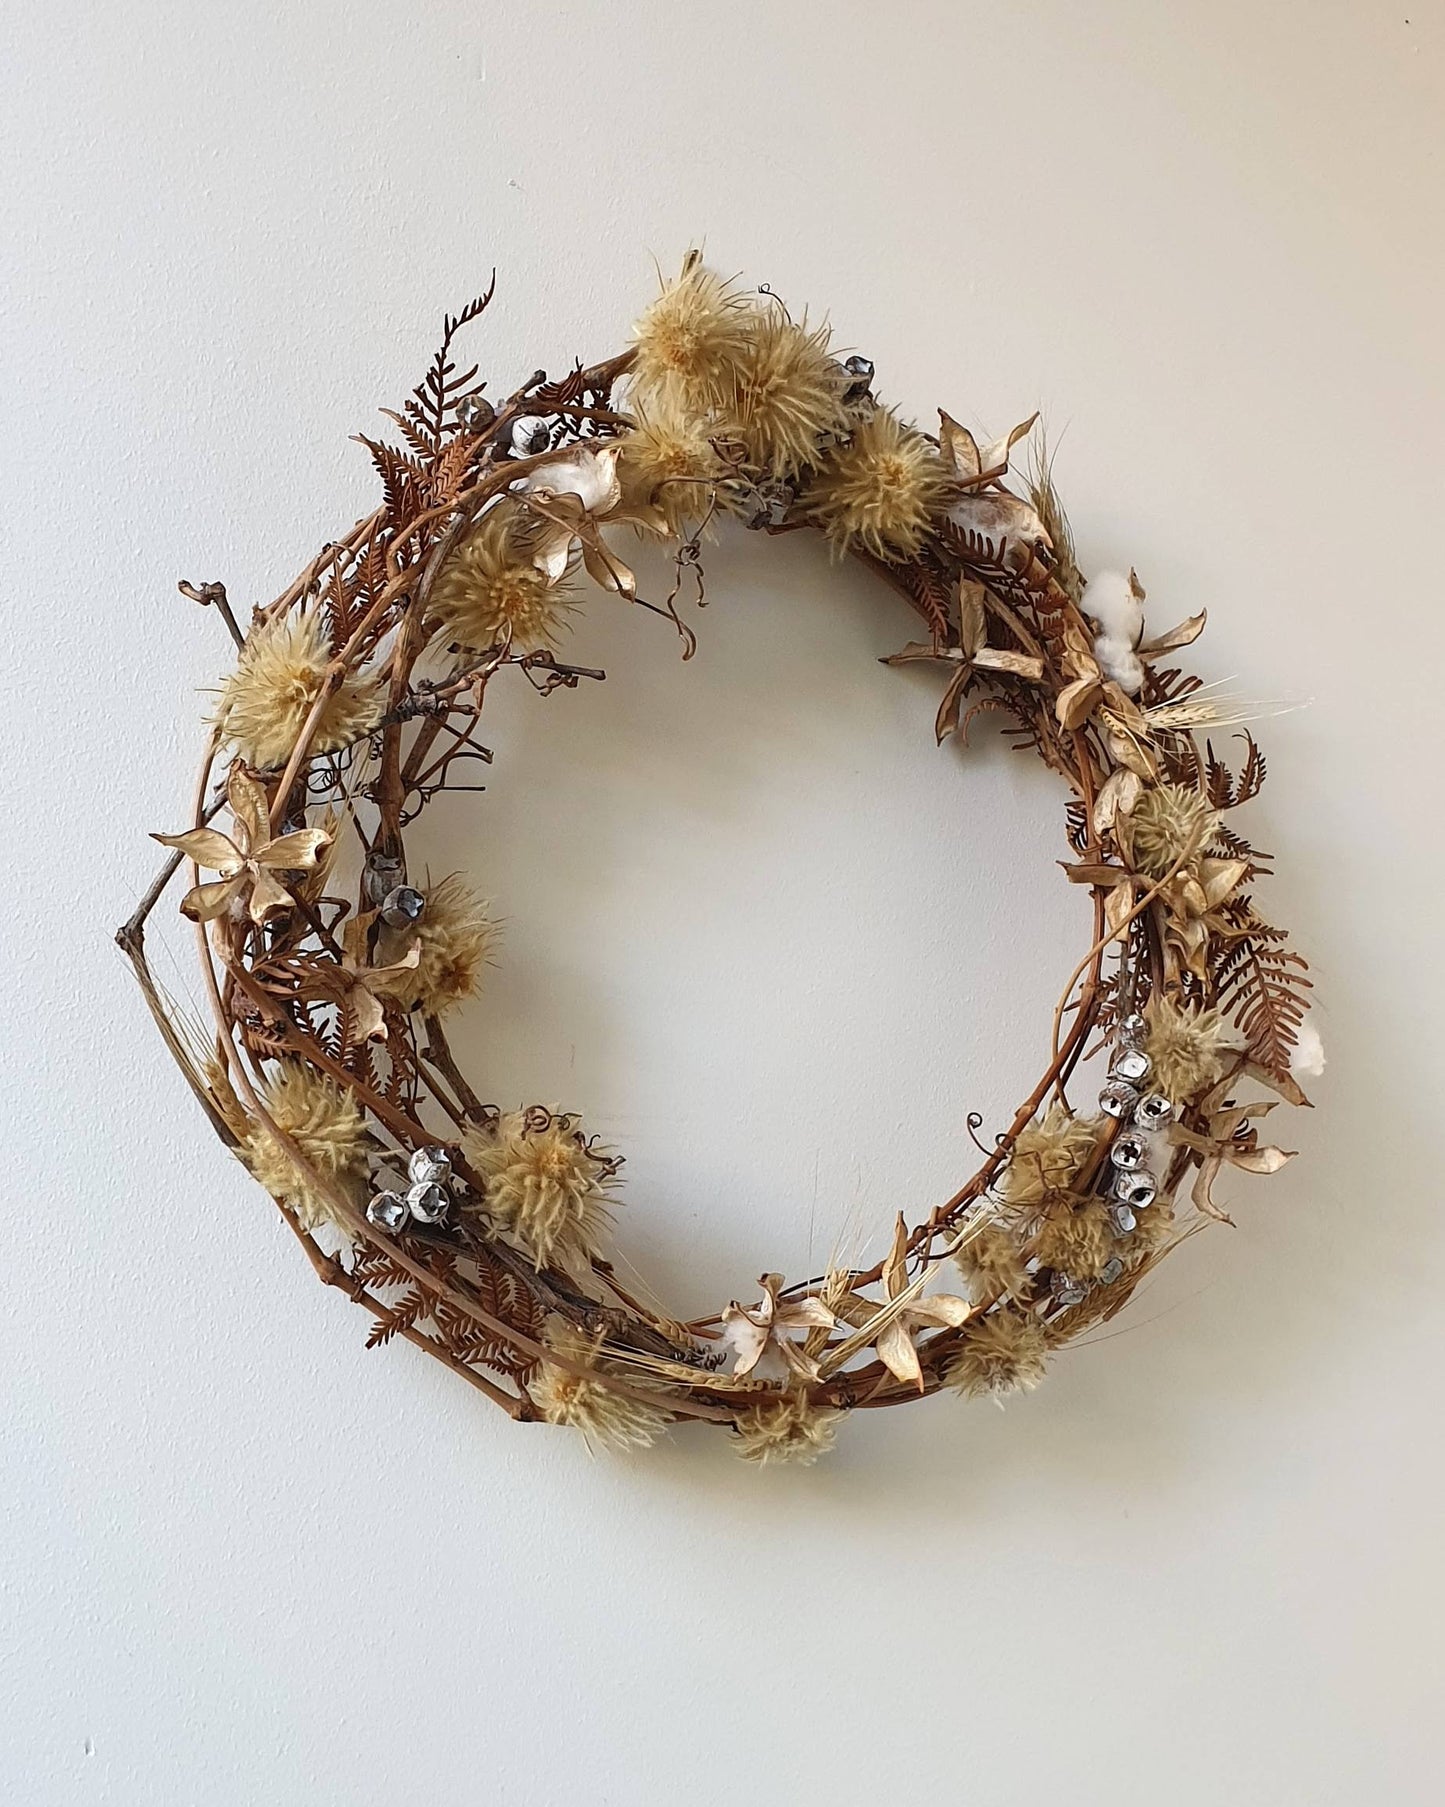 Intertwined Grape and Wisteria vines with Phylica, Tetragona Nuts, Bracken Fern, Wheat and Cotton Seedpods Wreath Dried Organic Art Sculpture by Elsa Thorp